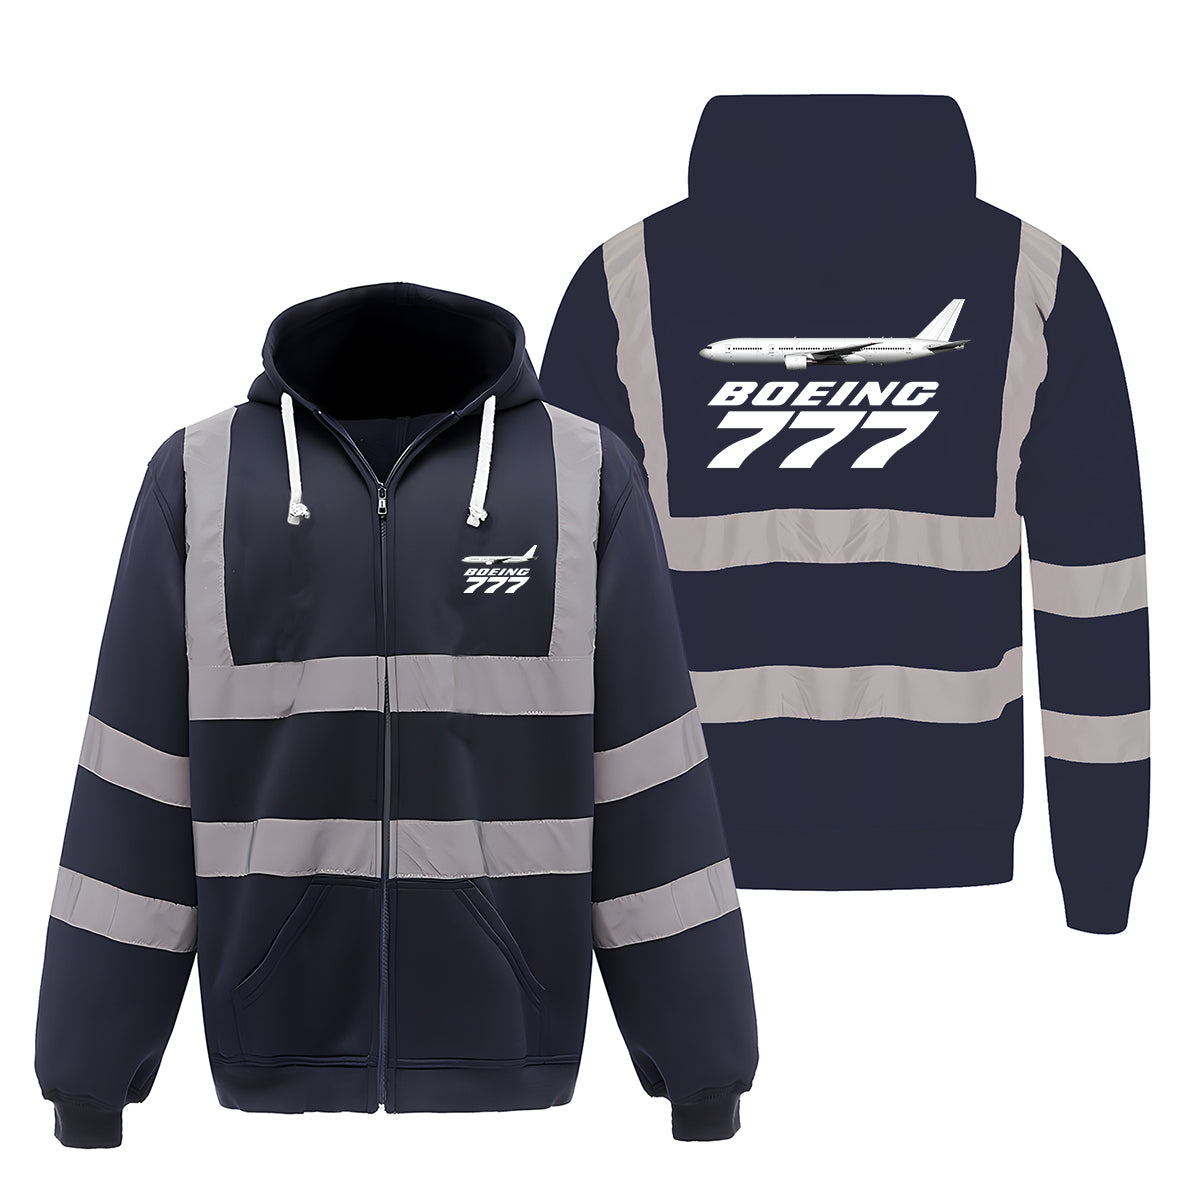 The Boeing 777 Designed Reflective Zipped Hoodies